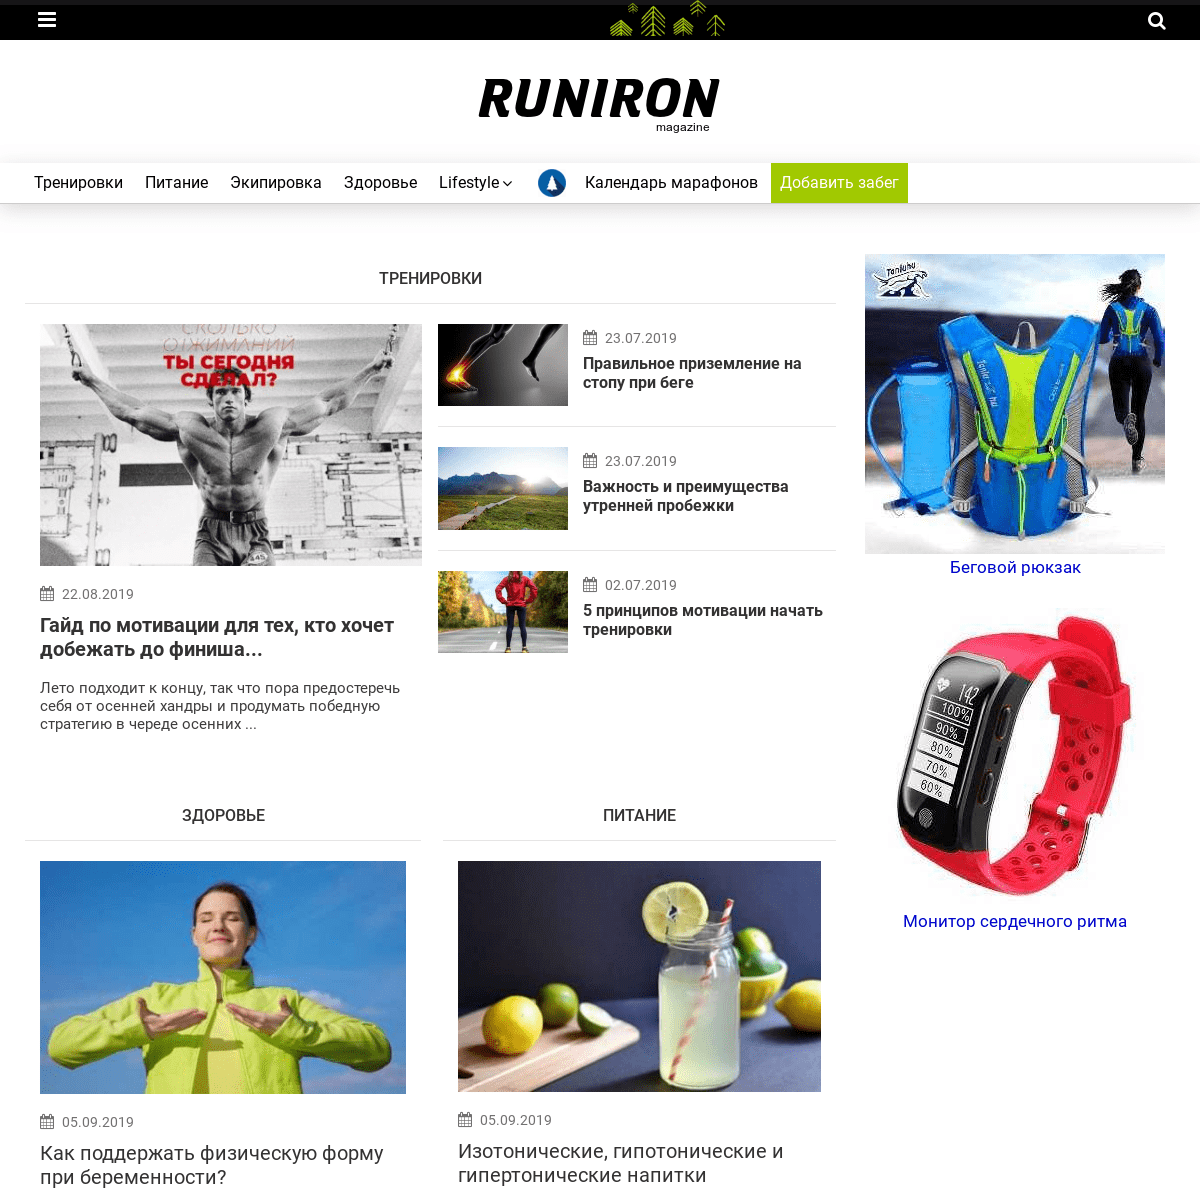 A complete backup of runiron.com